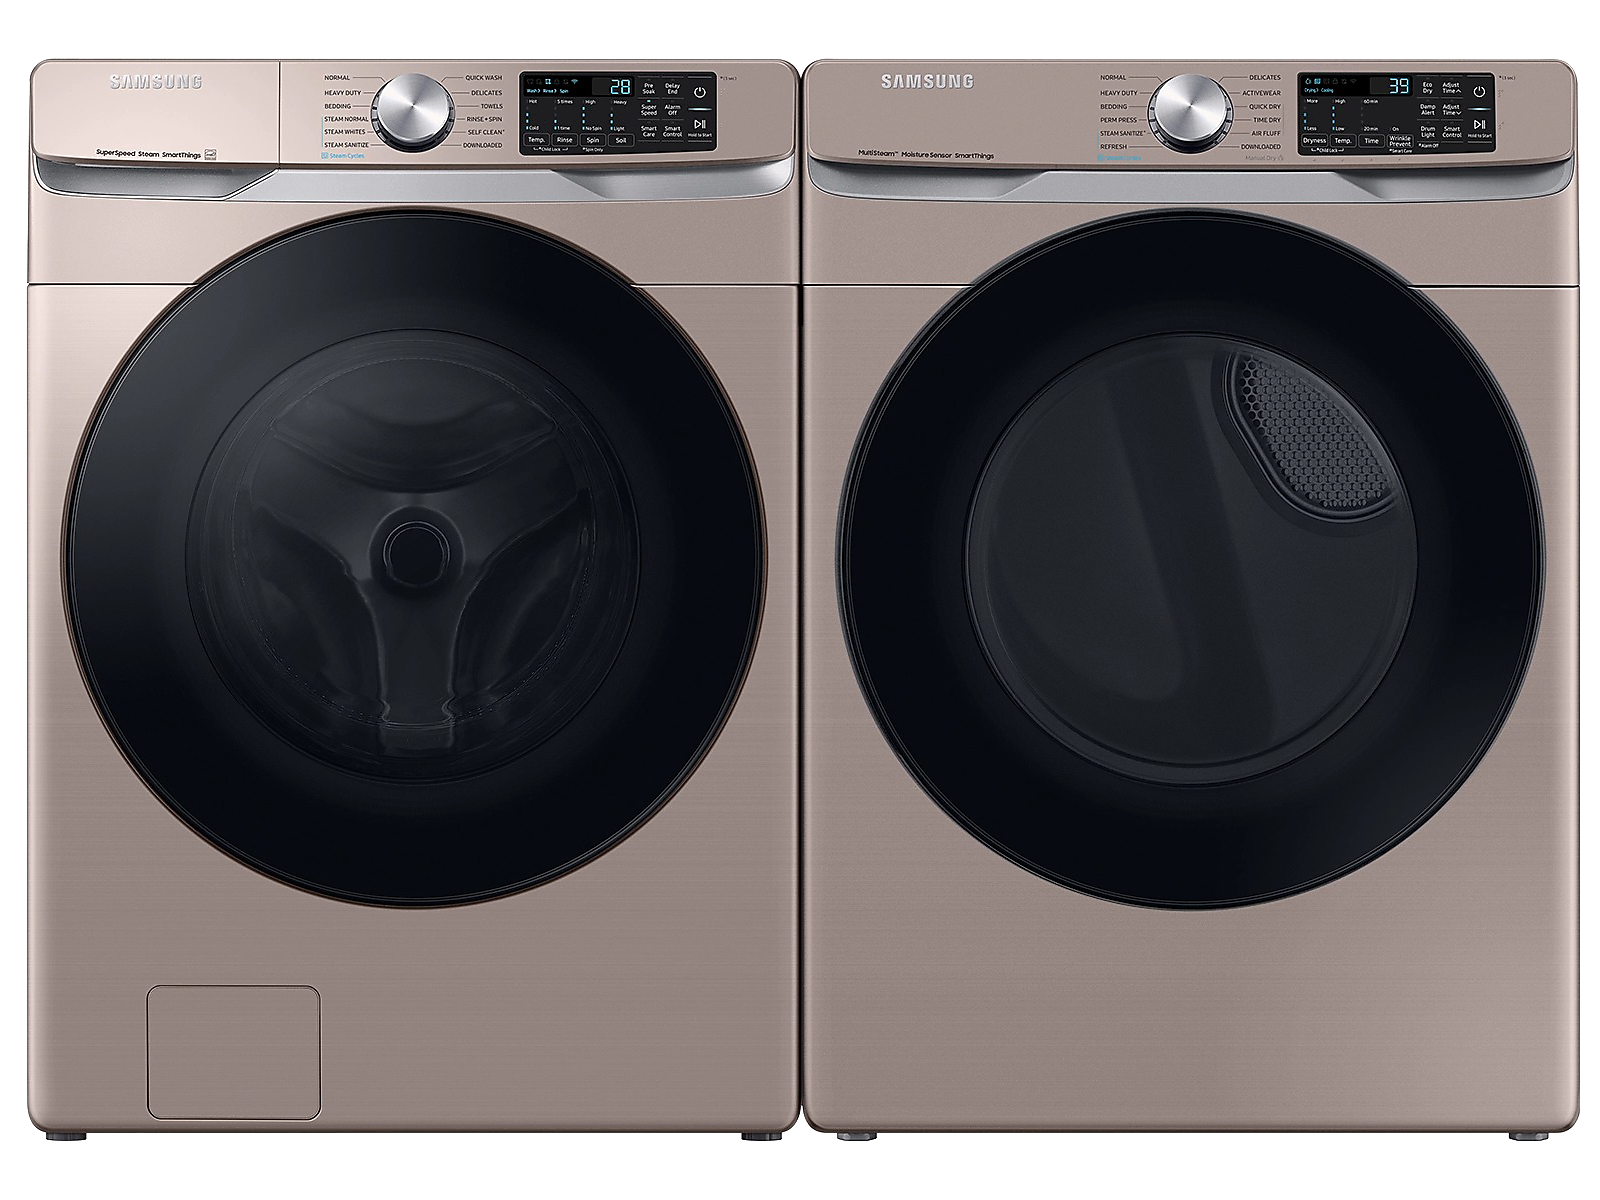 Samsung Large Capacity Smart Front Load Washer with Super Speed Wash & Smart Electric Dryer with Steam Sanitize+ in Champagne(BNDL-1651774284736) photo